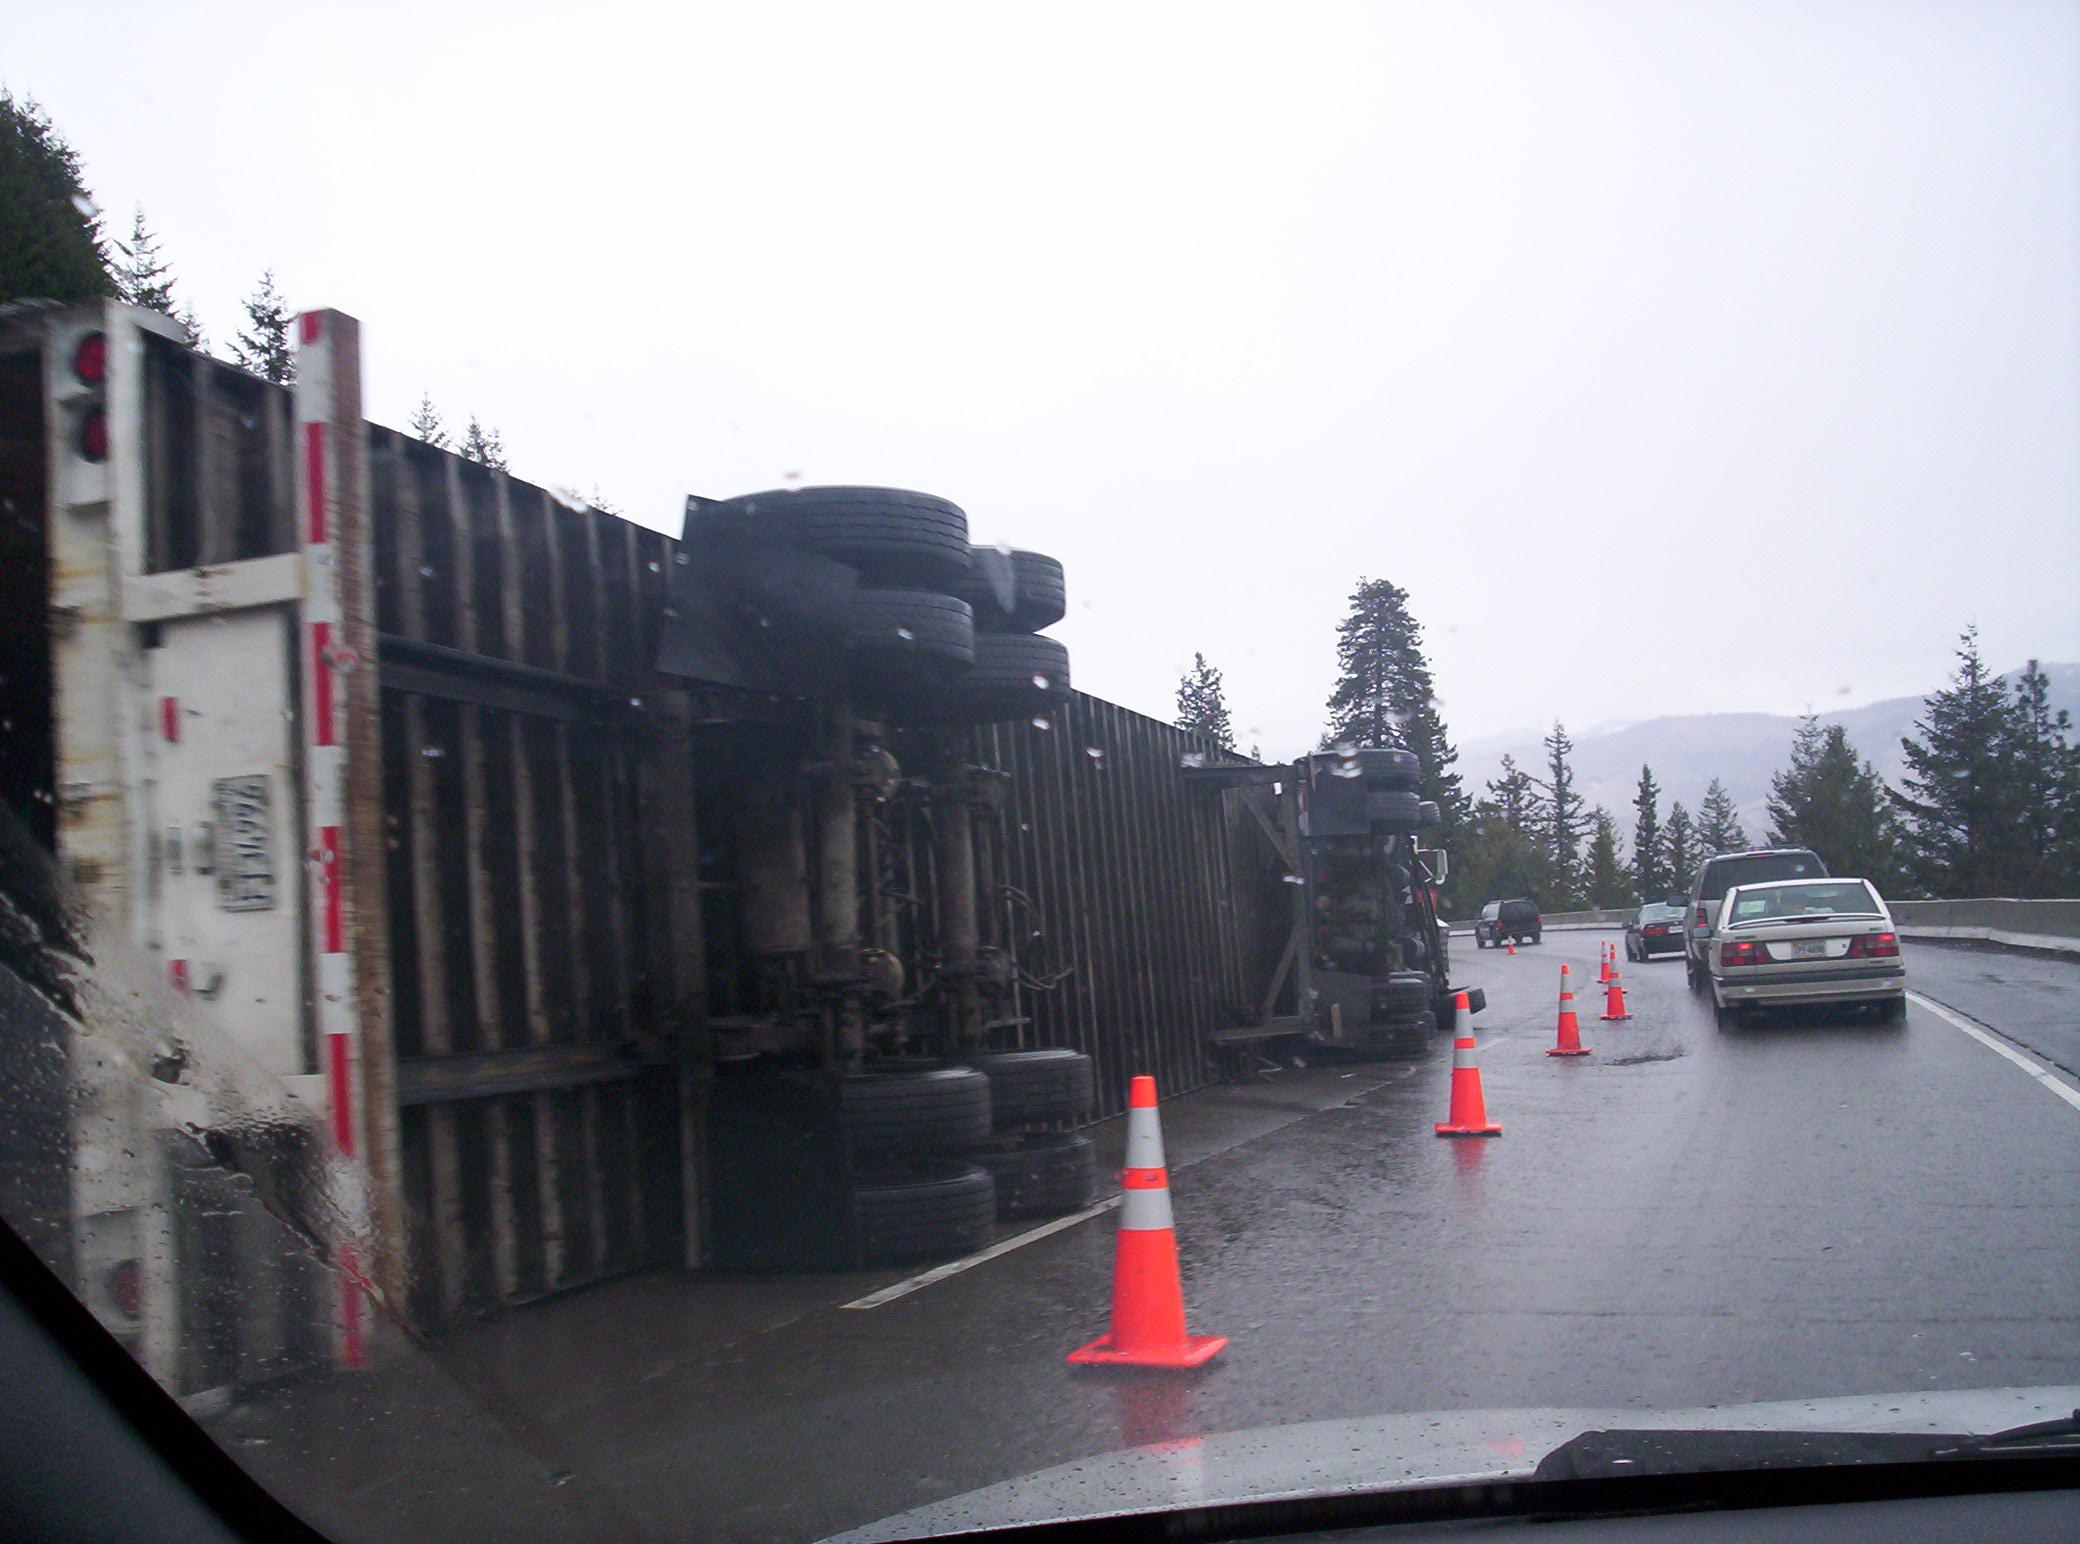 How Long do I have to File a Truck Accident Claim?